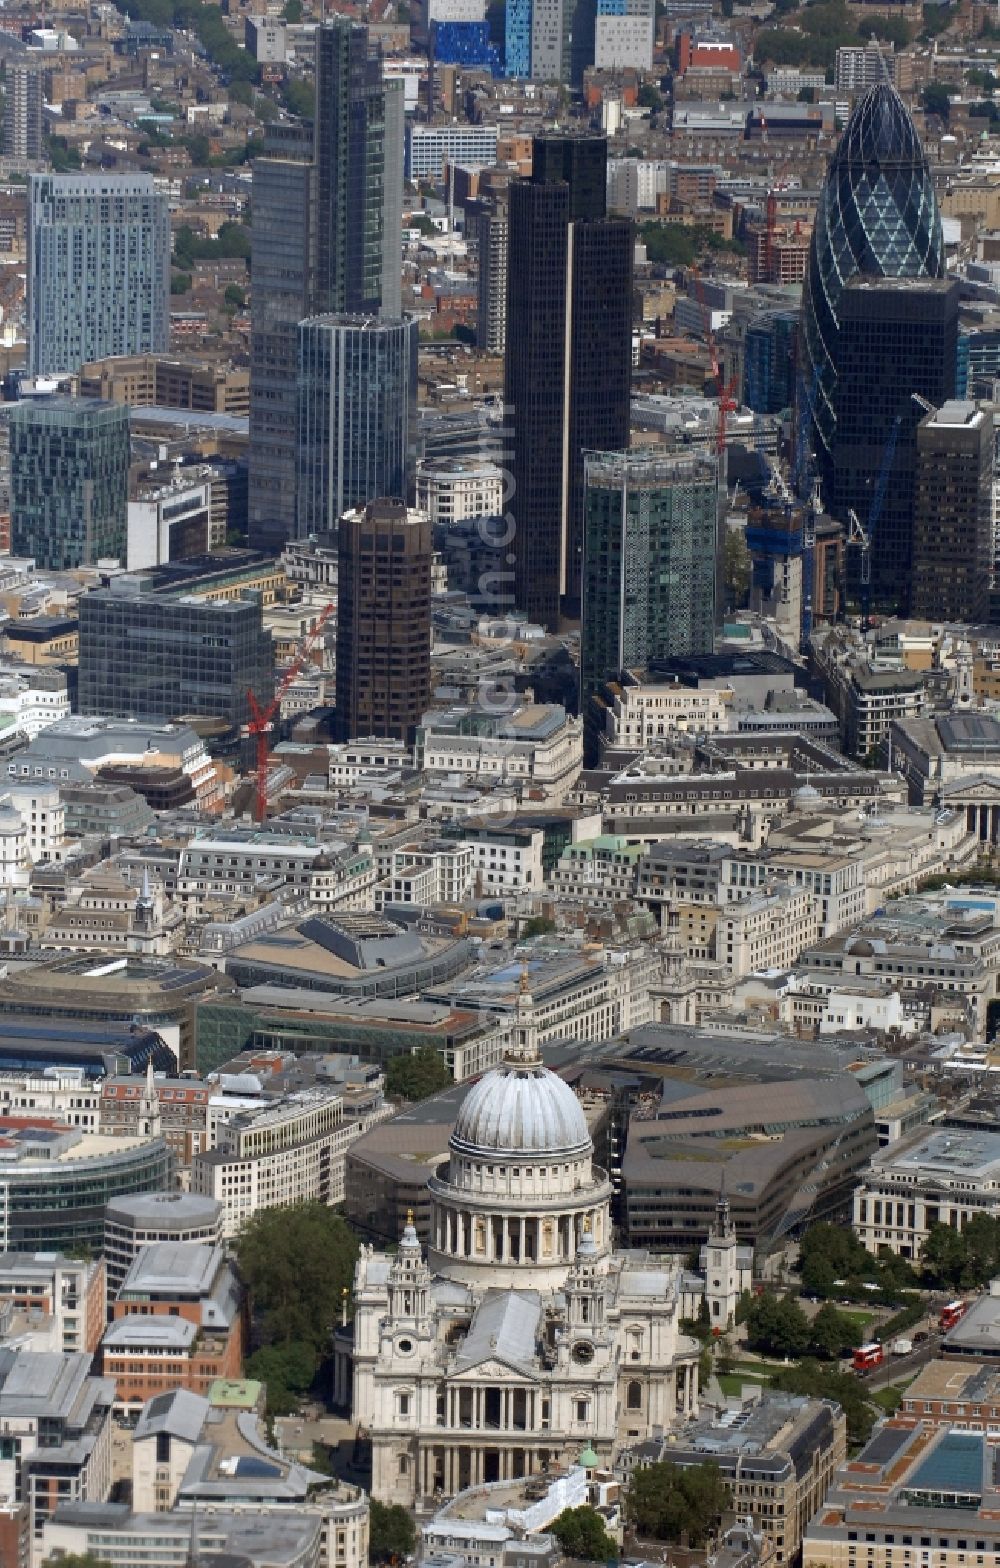 Aerial photograph London - View of the St Paul's Cathedral in the city borough of City of London. The world-famous church building is the headquarters of the London diocese of the Anglican Church. The St. Paul's Cathedral is one of the largest cathedrals in the world, it is also regarded as the most famous church in the British capital